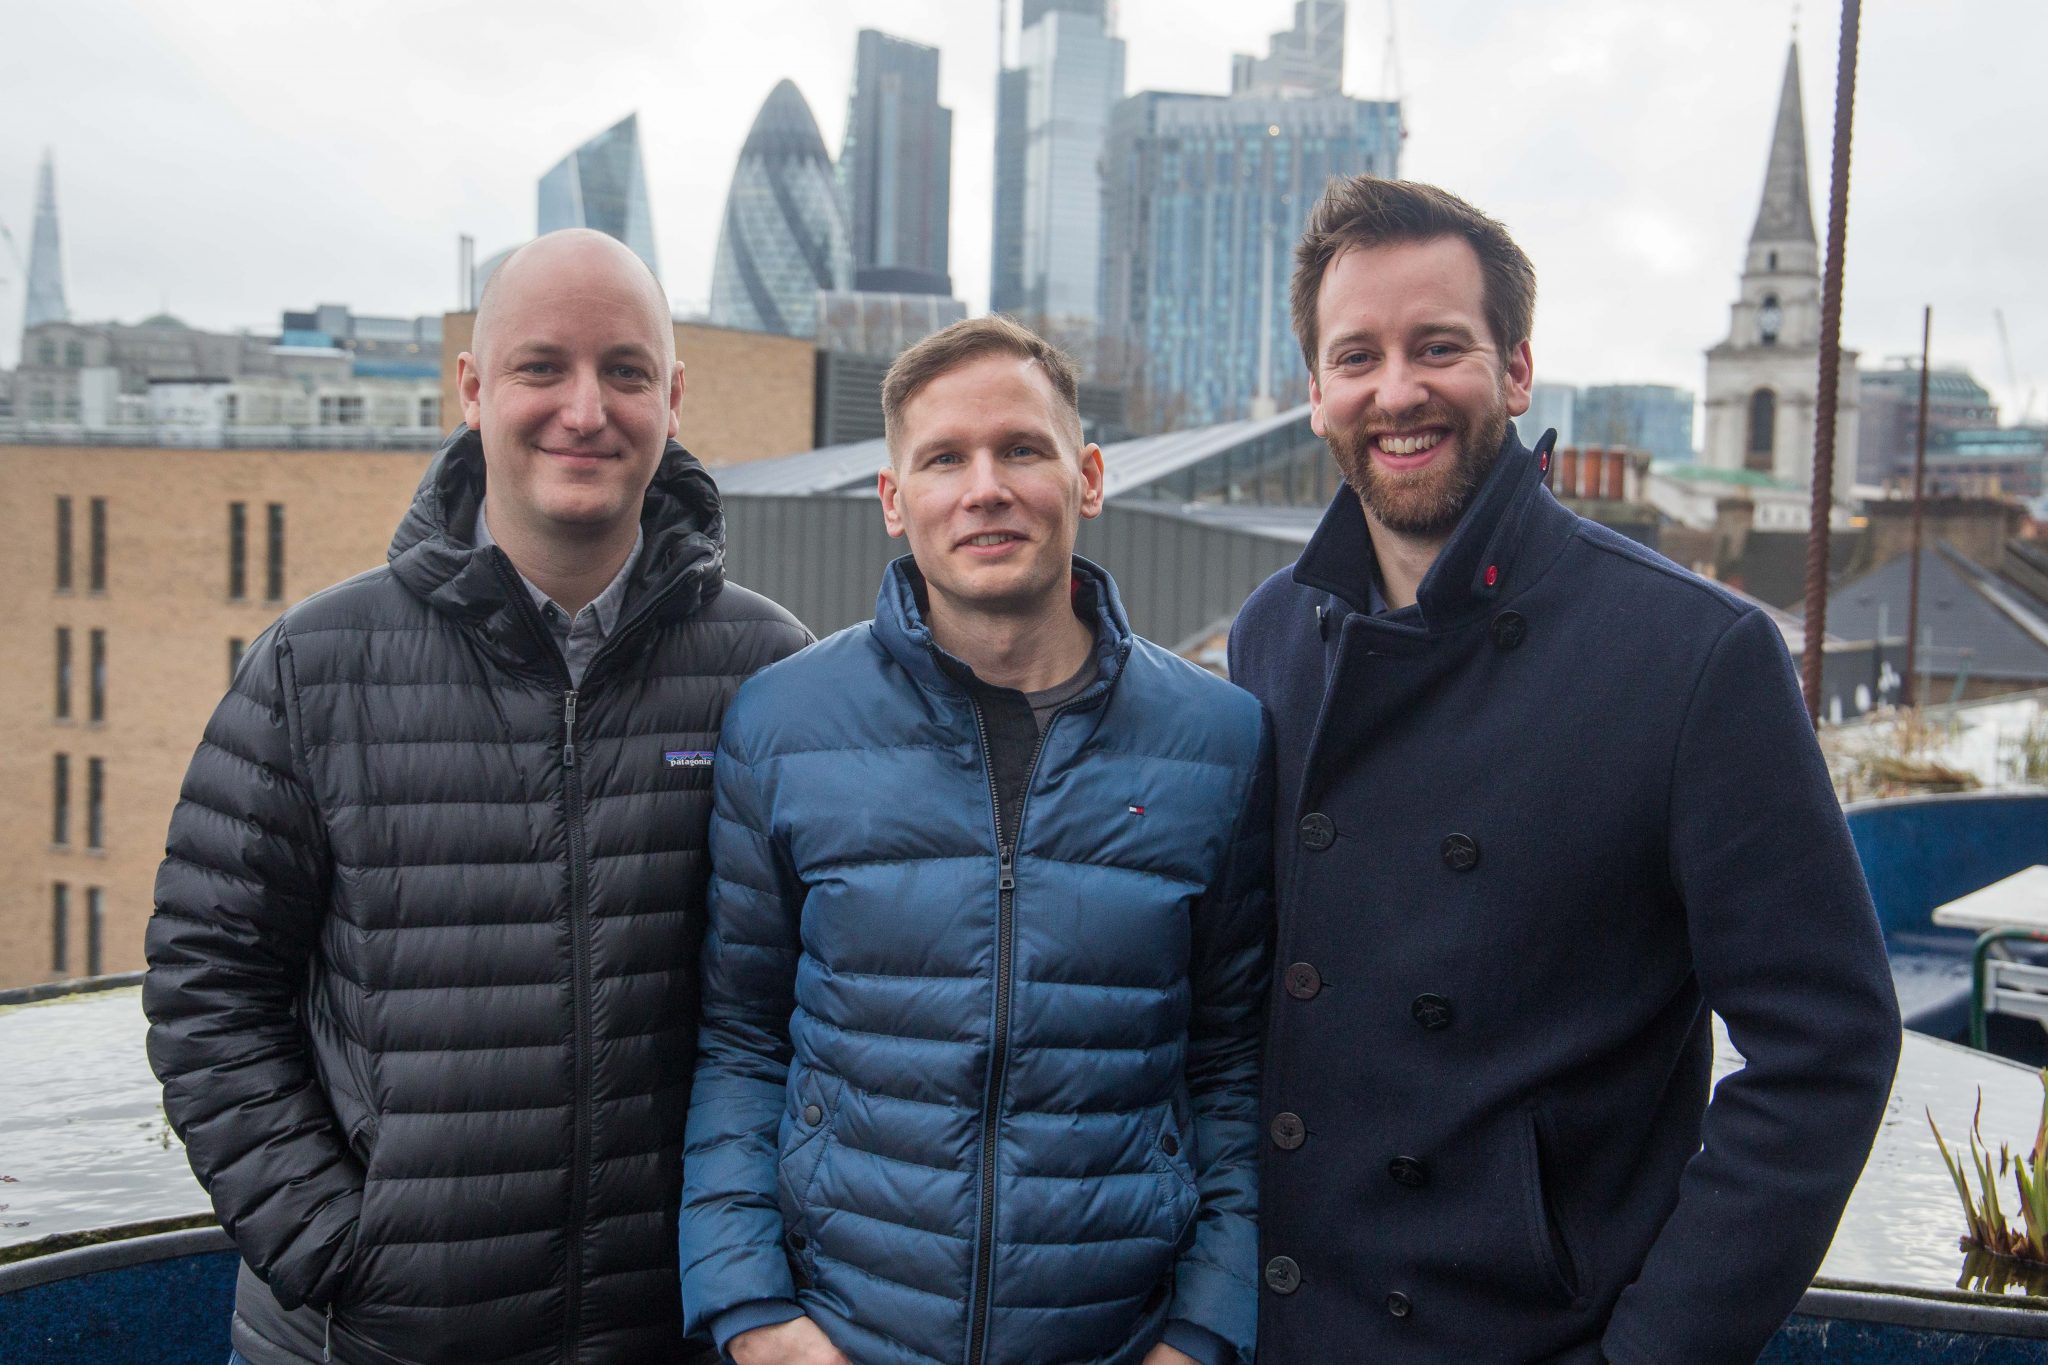 Freetrade's early crowdfunding investors in line for £1m+ returns | Sifted